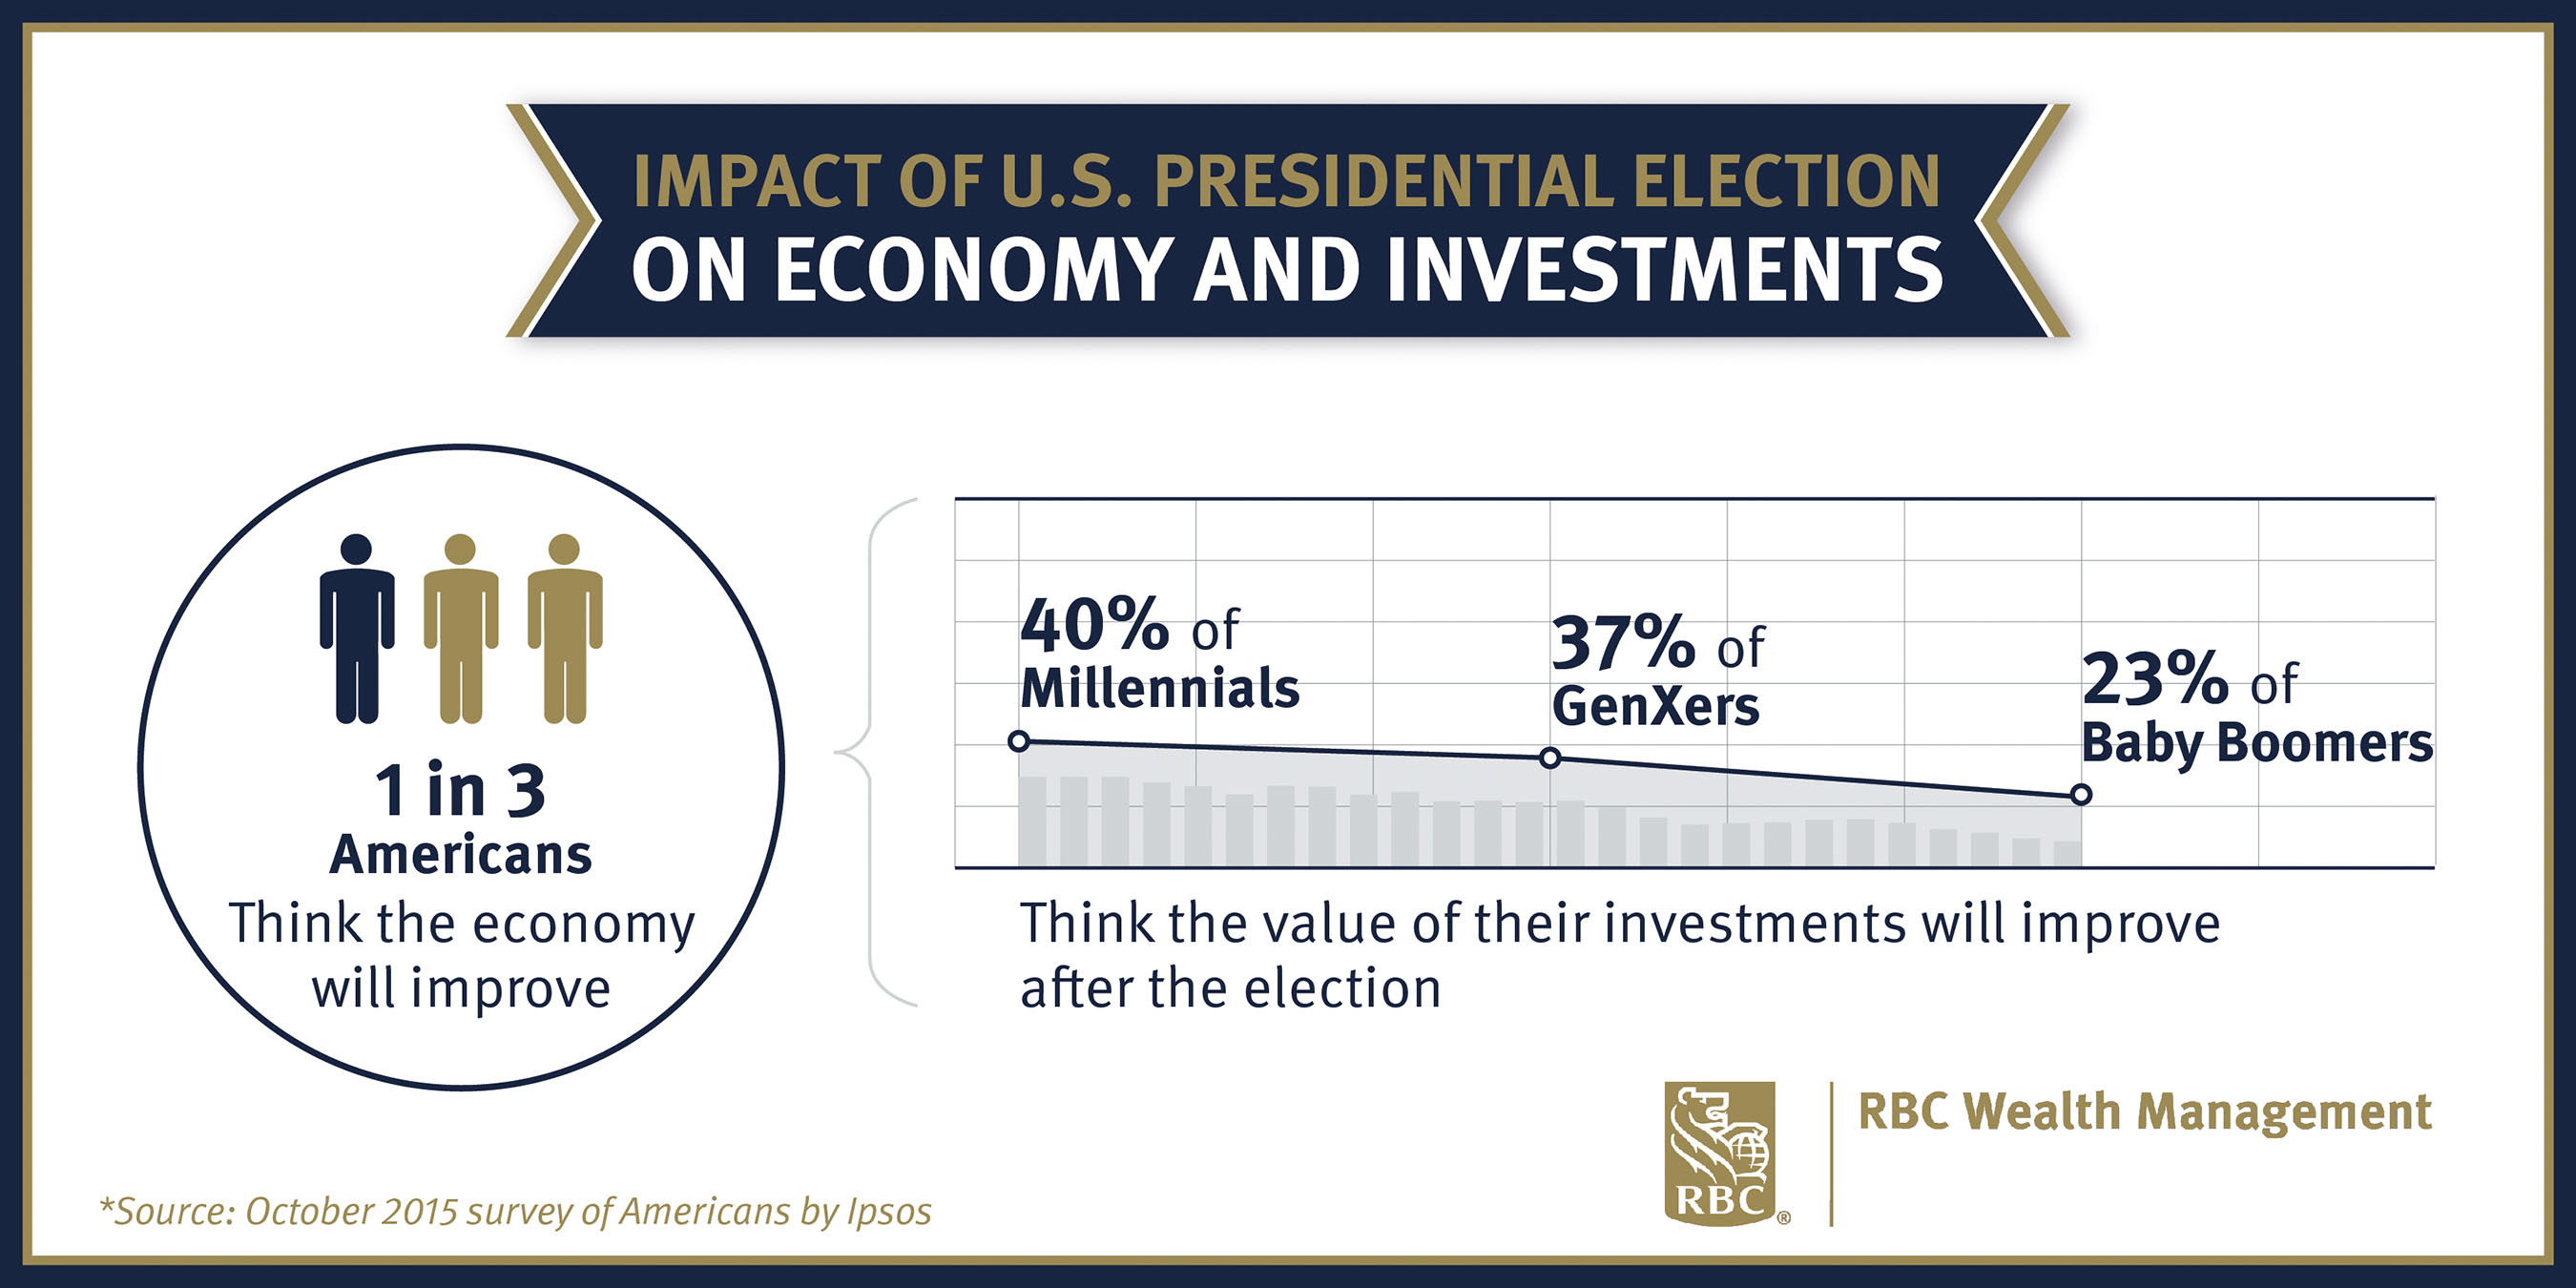 RBC Wealth Management Poll: Americans Optimistic that Presidential Election Will Boost Economy and Personal Investments (PRNewsFoto/RBC Wealth Management - U.S.)